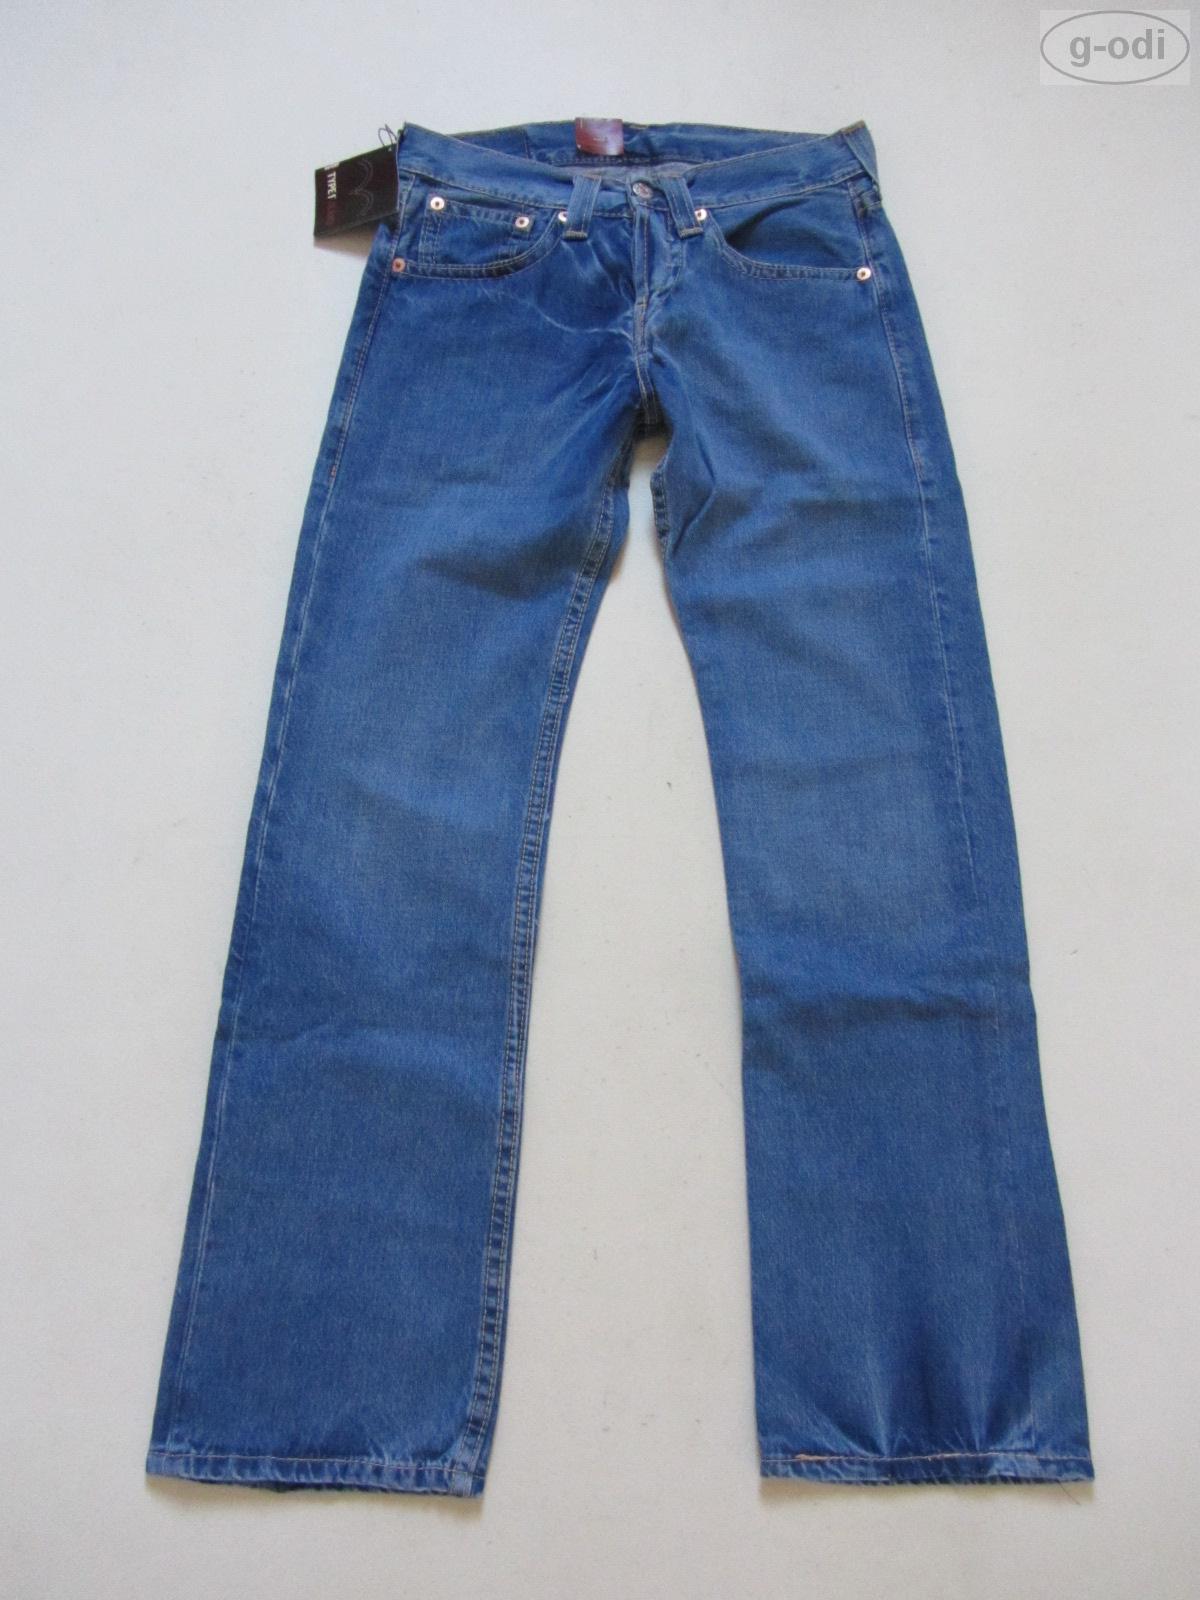 Levi'S TYPE 1 Lot 901 Jeans Trousers W 30/L 32, NEW! Gold Diggers UR ...